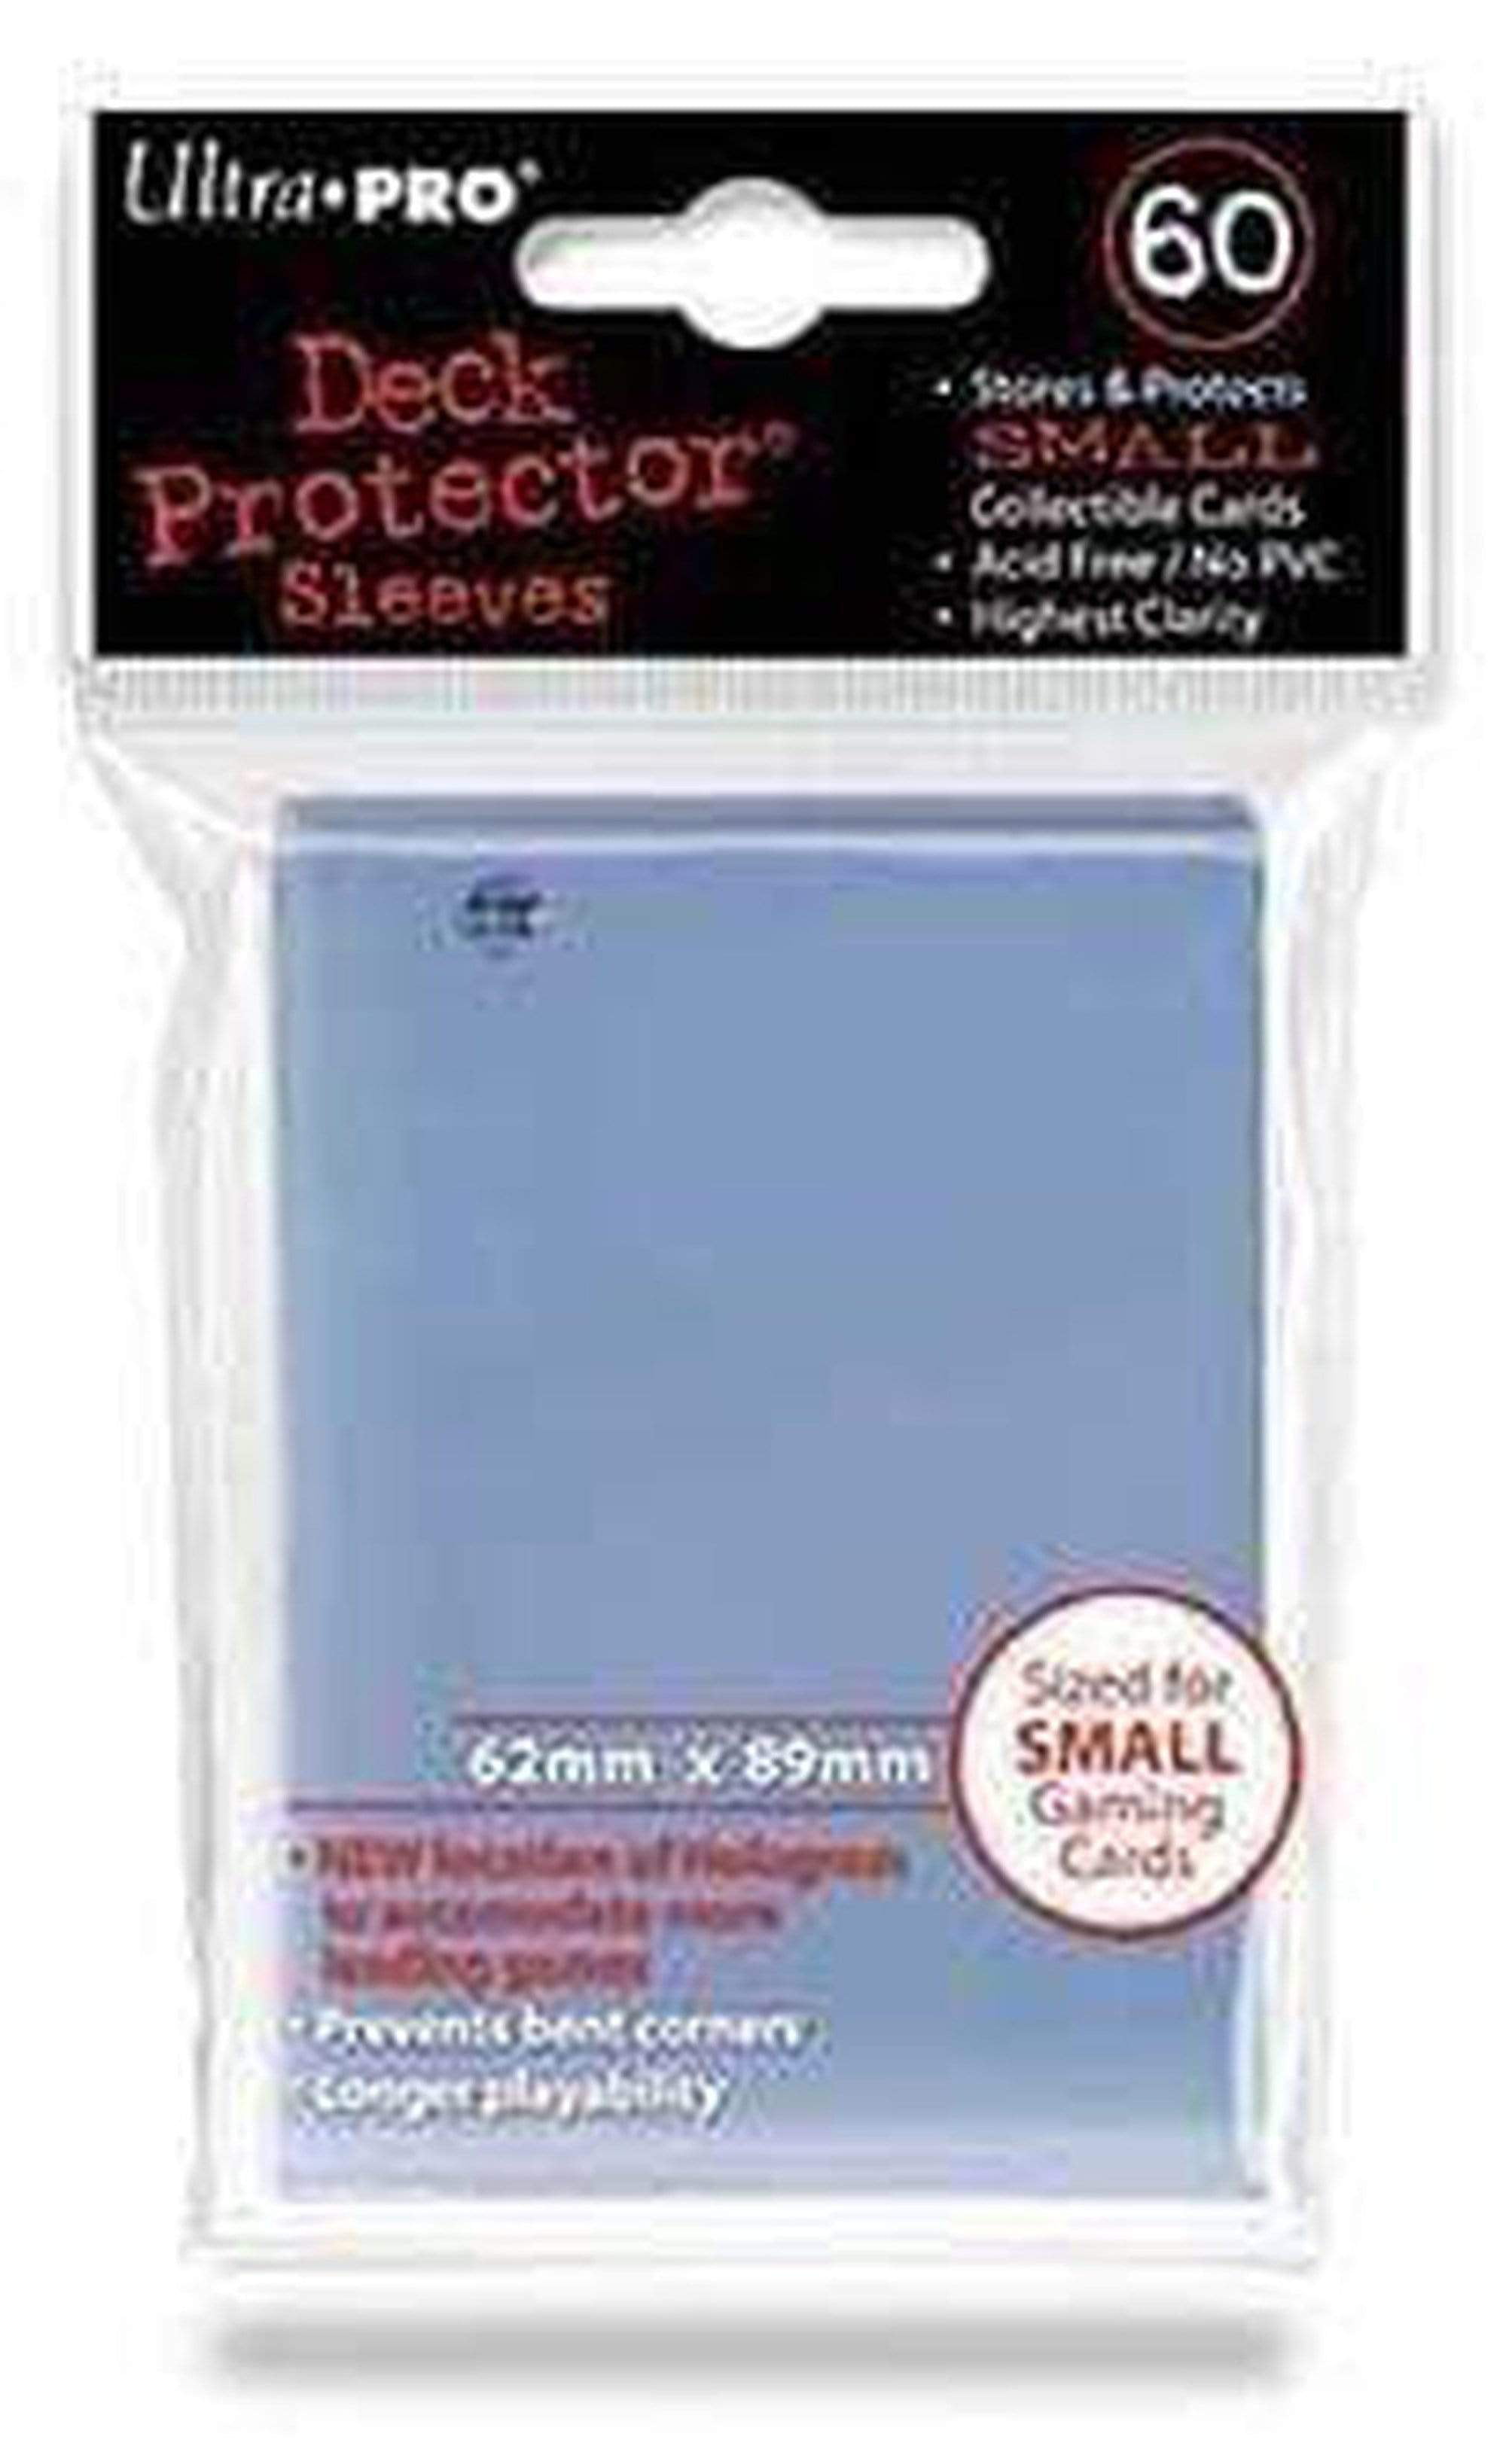 60 Bustine Protettive NEW Ultra PRO MATTE Small Size Sleeves • Trasparenti Clear 